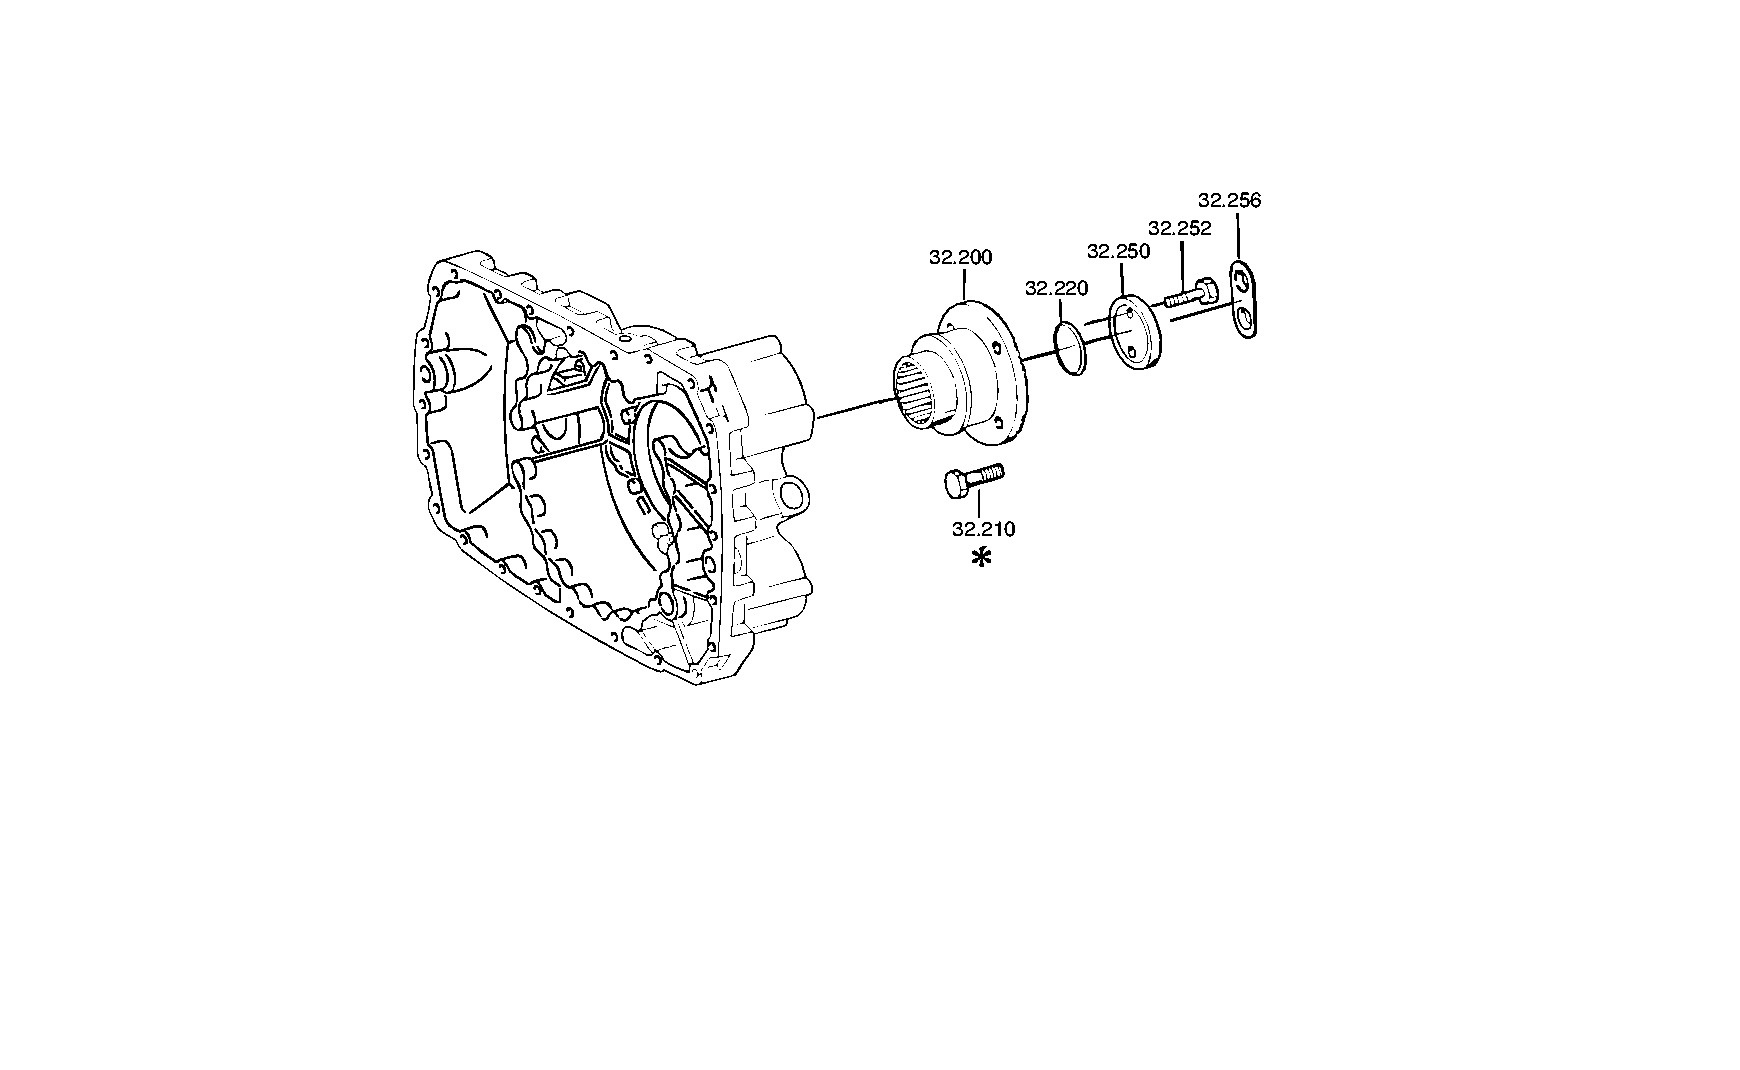 drawing for DAF 1931028 - PLANET CARRIER (figure 1)